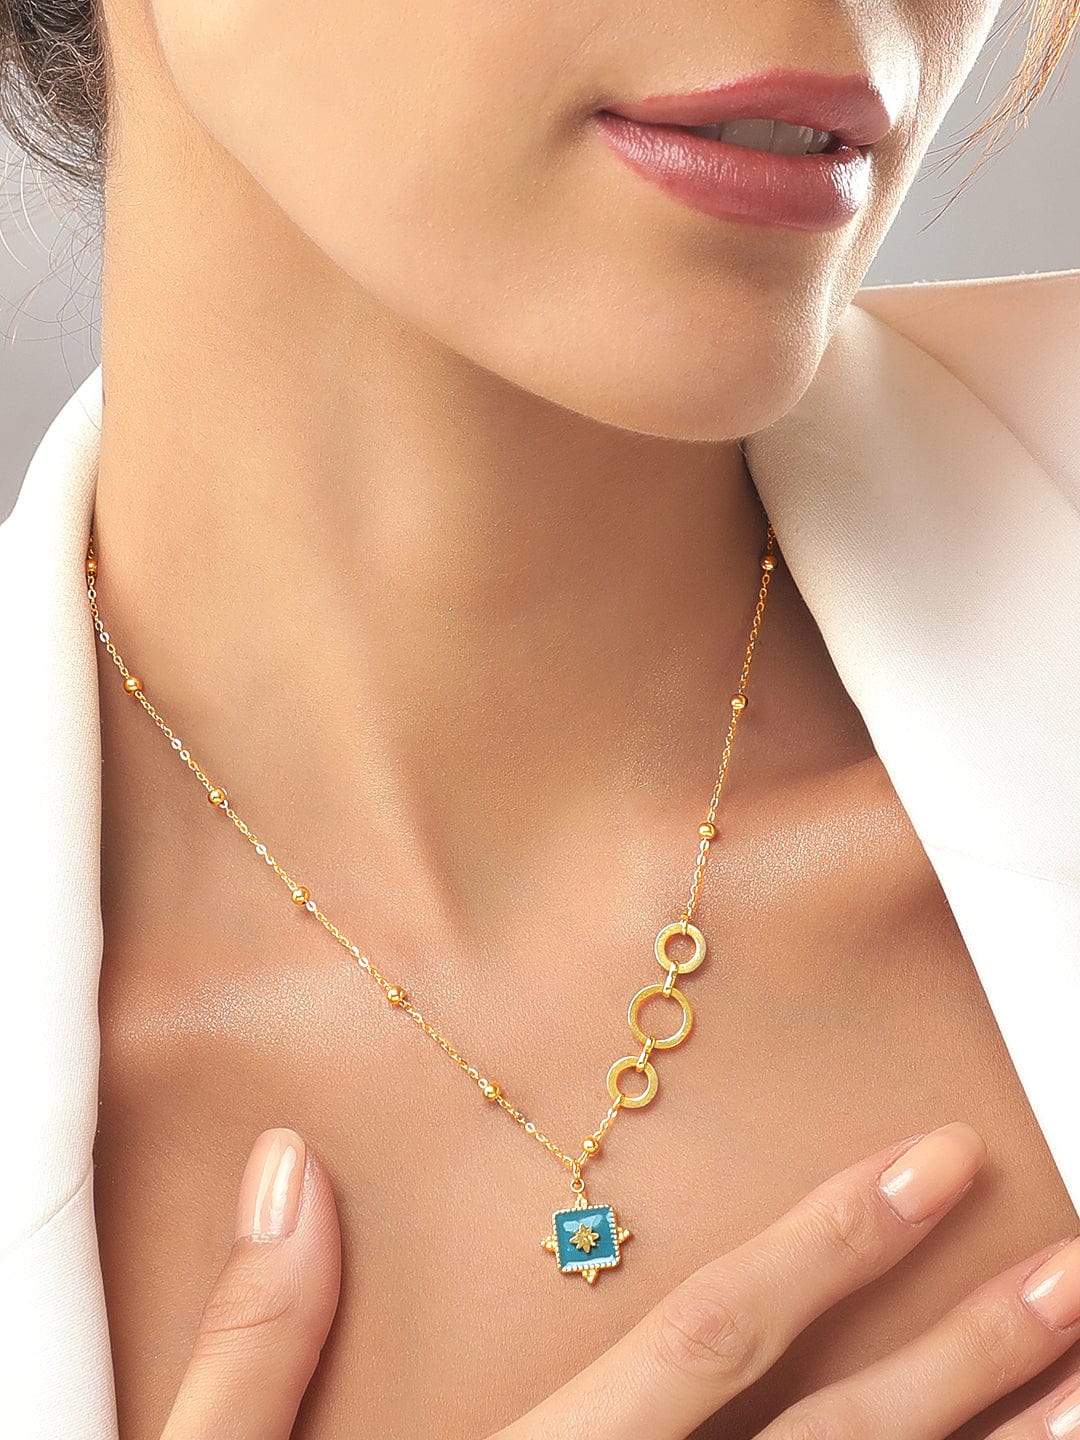 Rubans Voguish 18K Gold Plated Stainless Steel Bead & Enemal Pendant Necklace. Chain & Necklaces